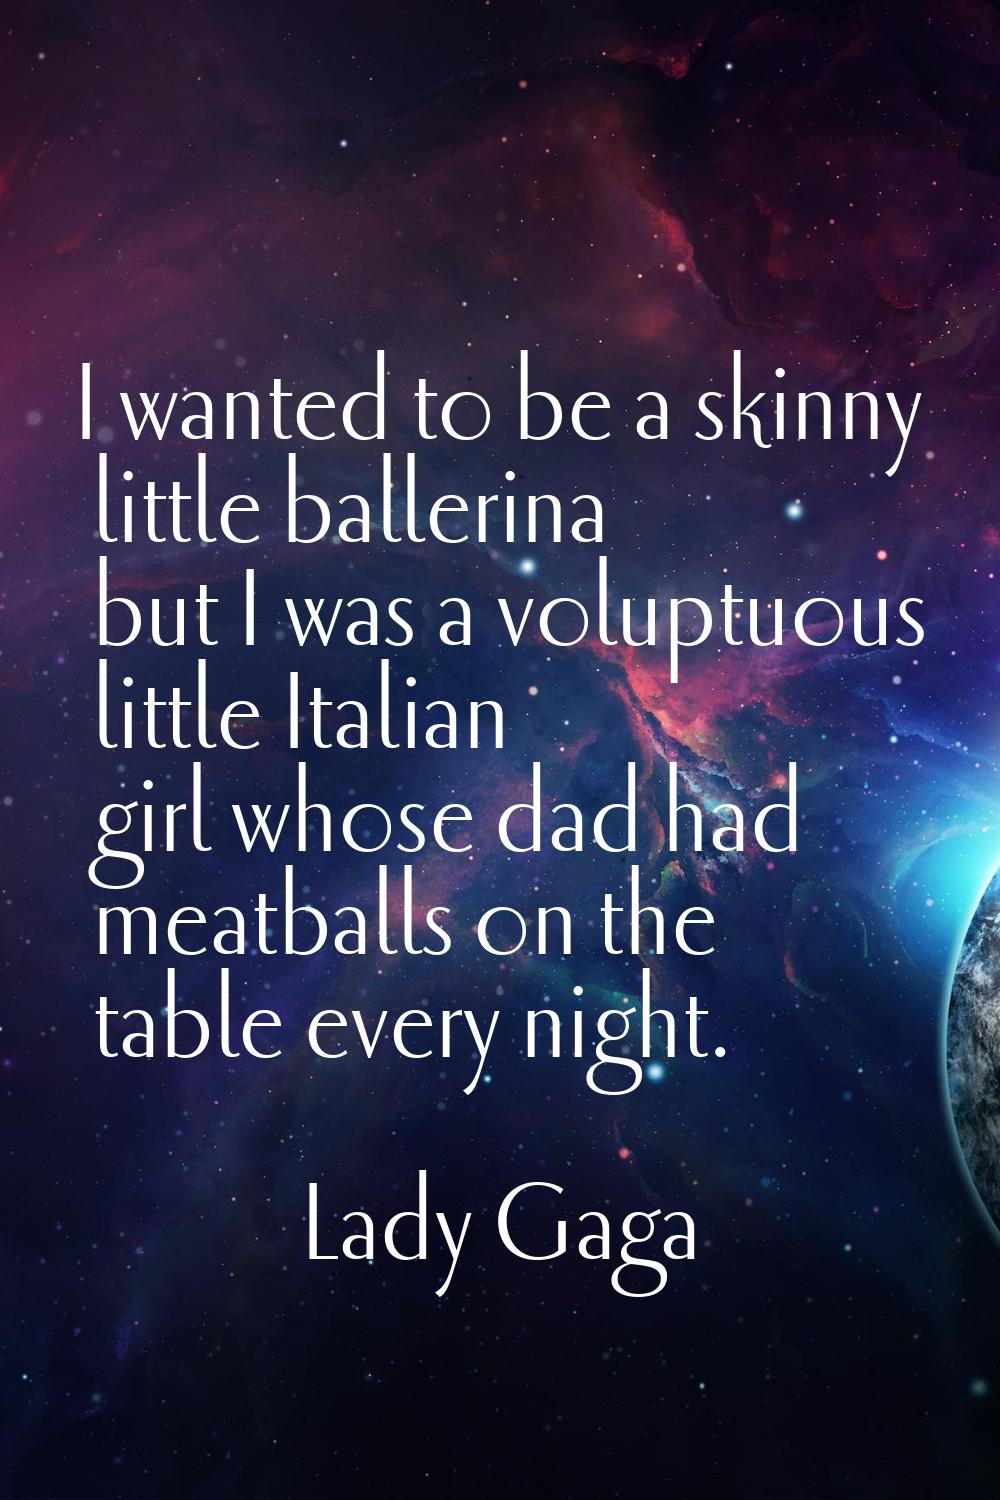 I wanted to be a skinny little ballerina but I was a voluptuous little Italian girl whose dad had m